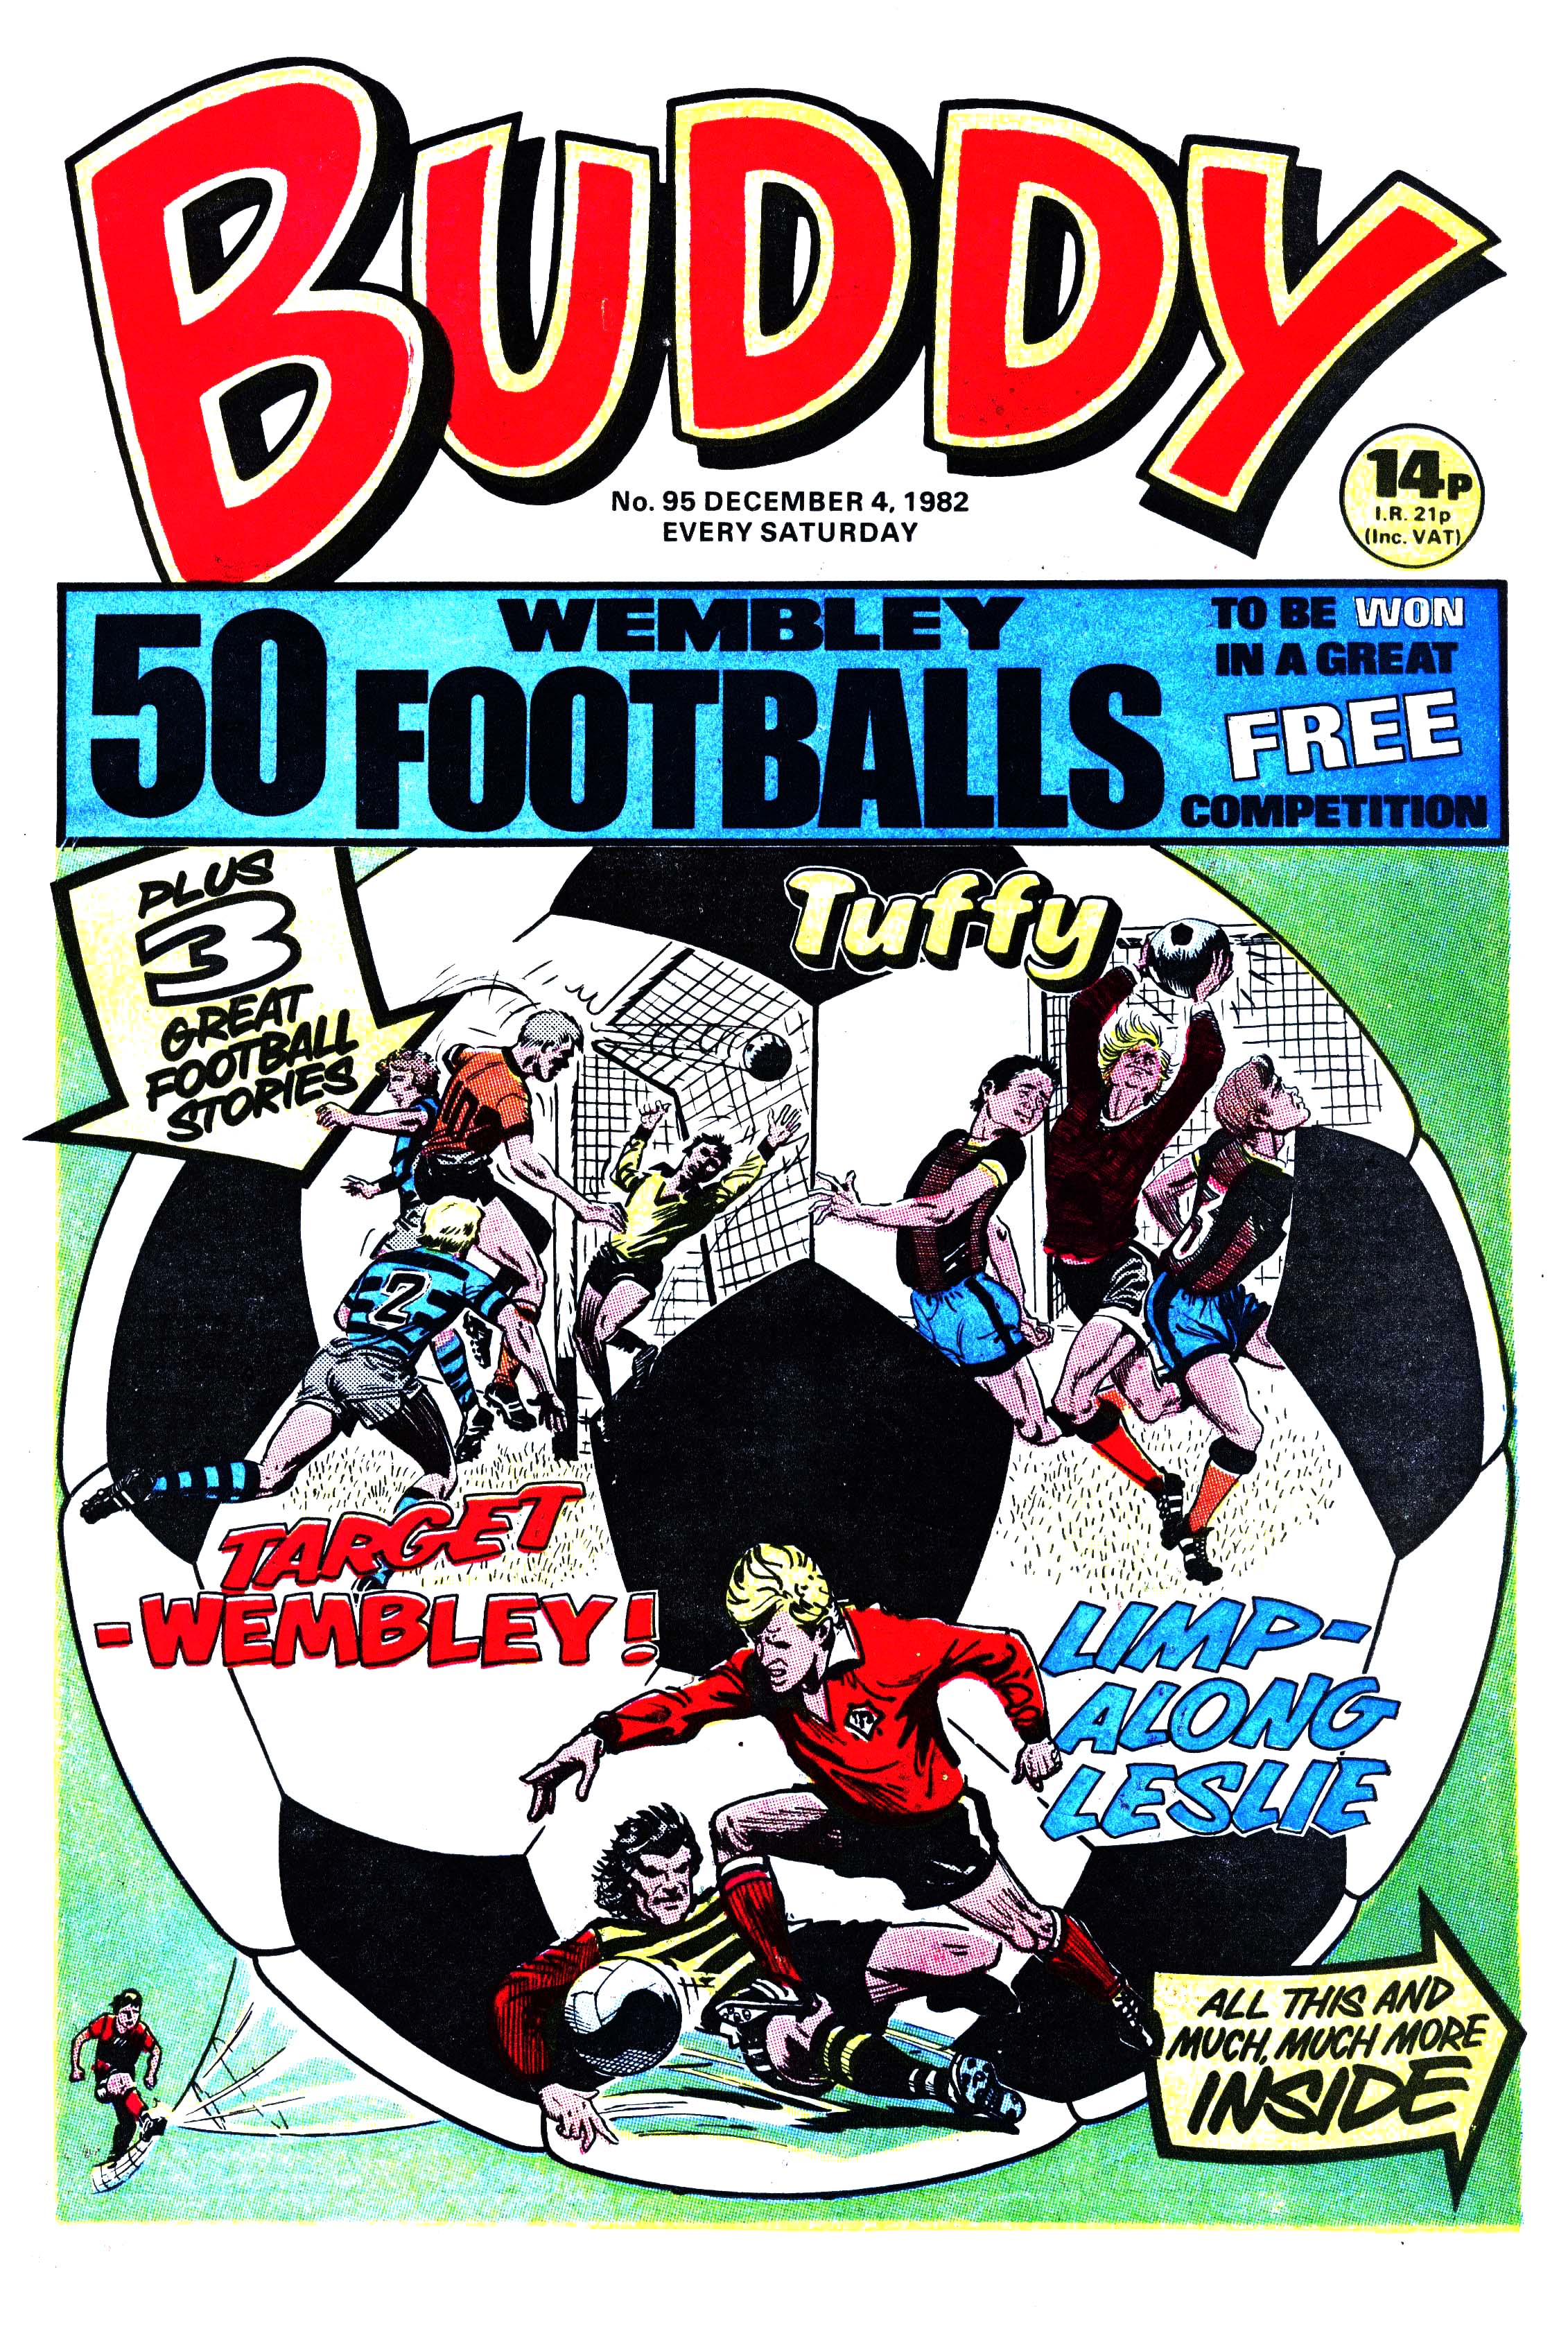 Read online Buddy comic -  Issue #95 - 1